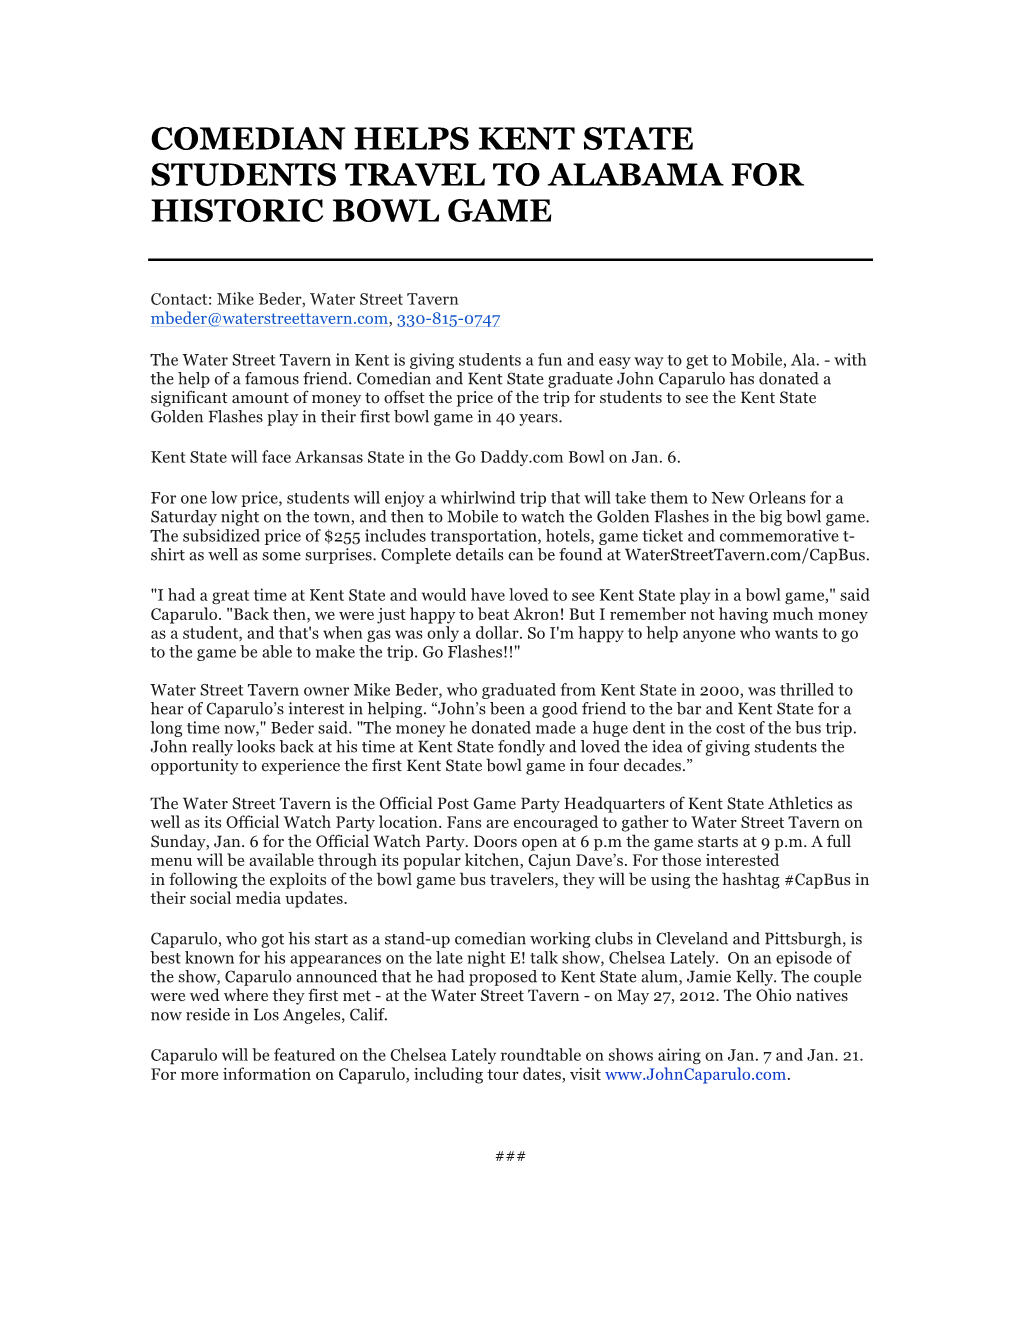 Comedian Helps Kent State Students Travel to Alabama for Historic Bowl Game